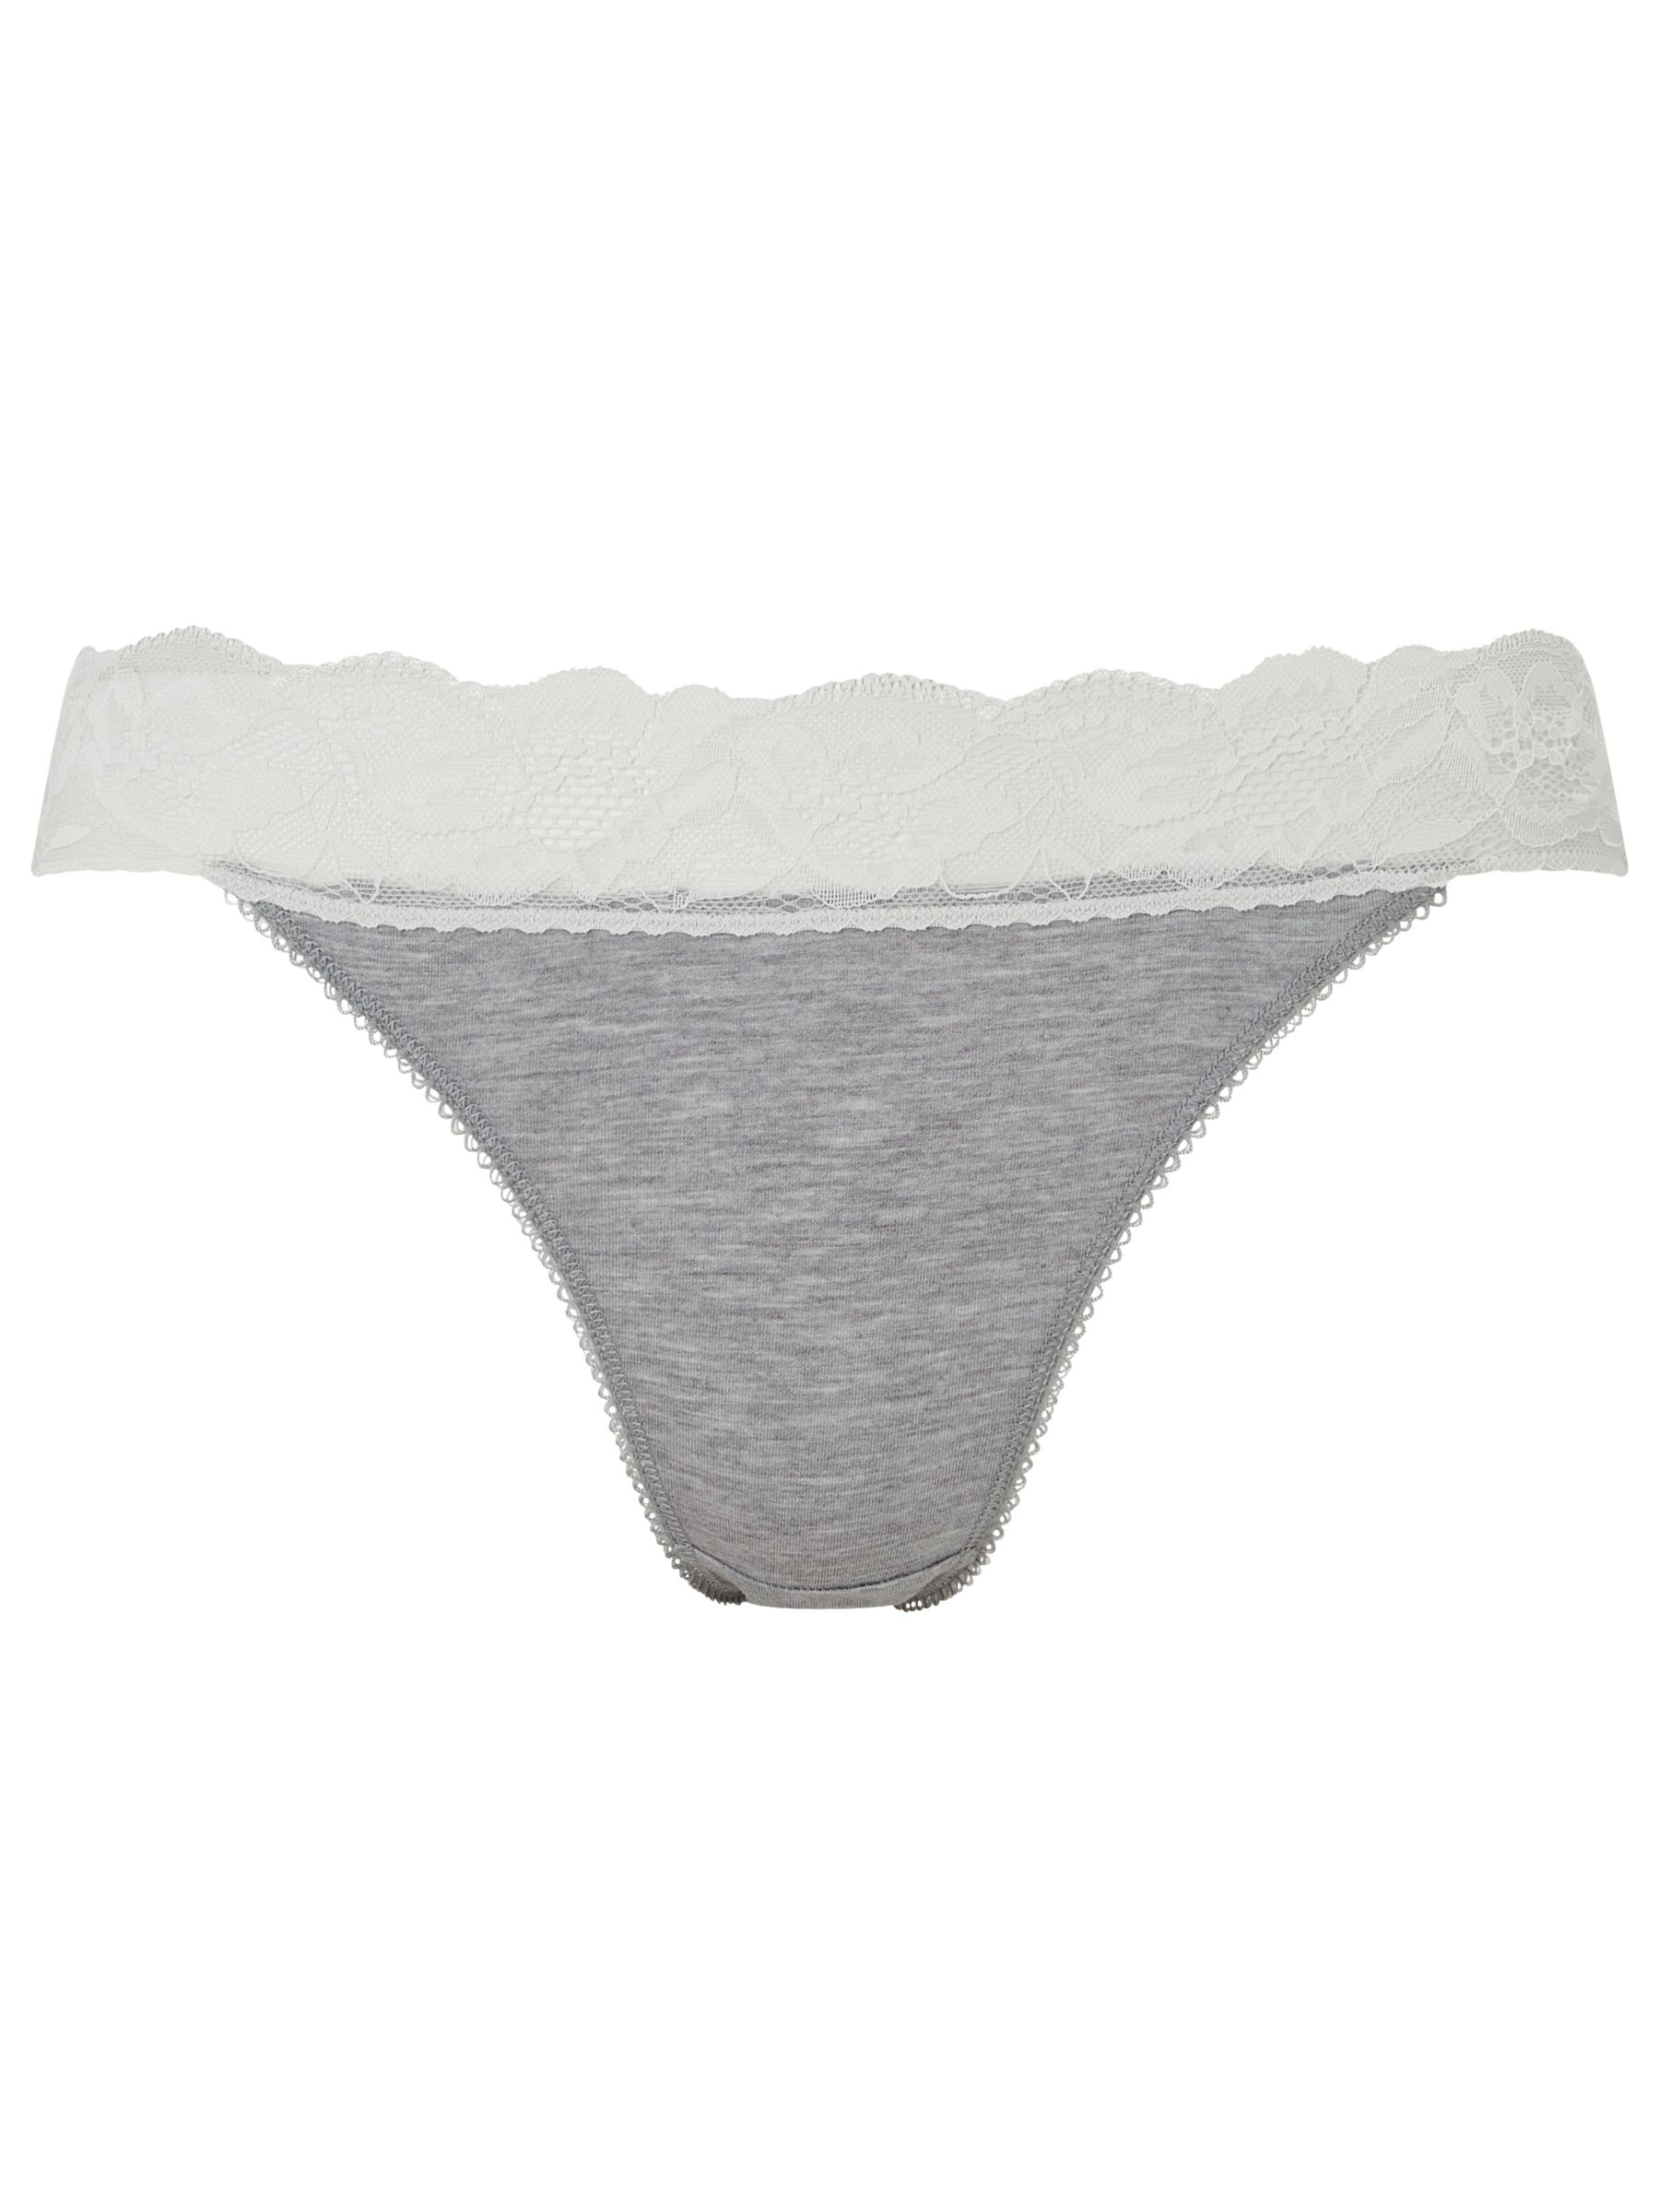 John Lewis ANYDAY Lace Trim Tanga Knickers, Pack of 3, Grey Marl/Cream, 10